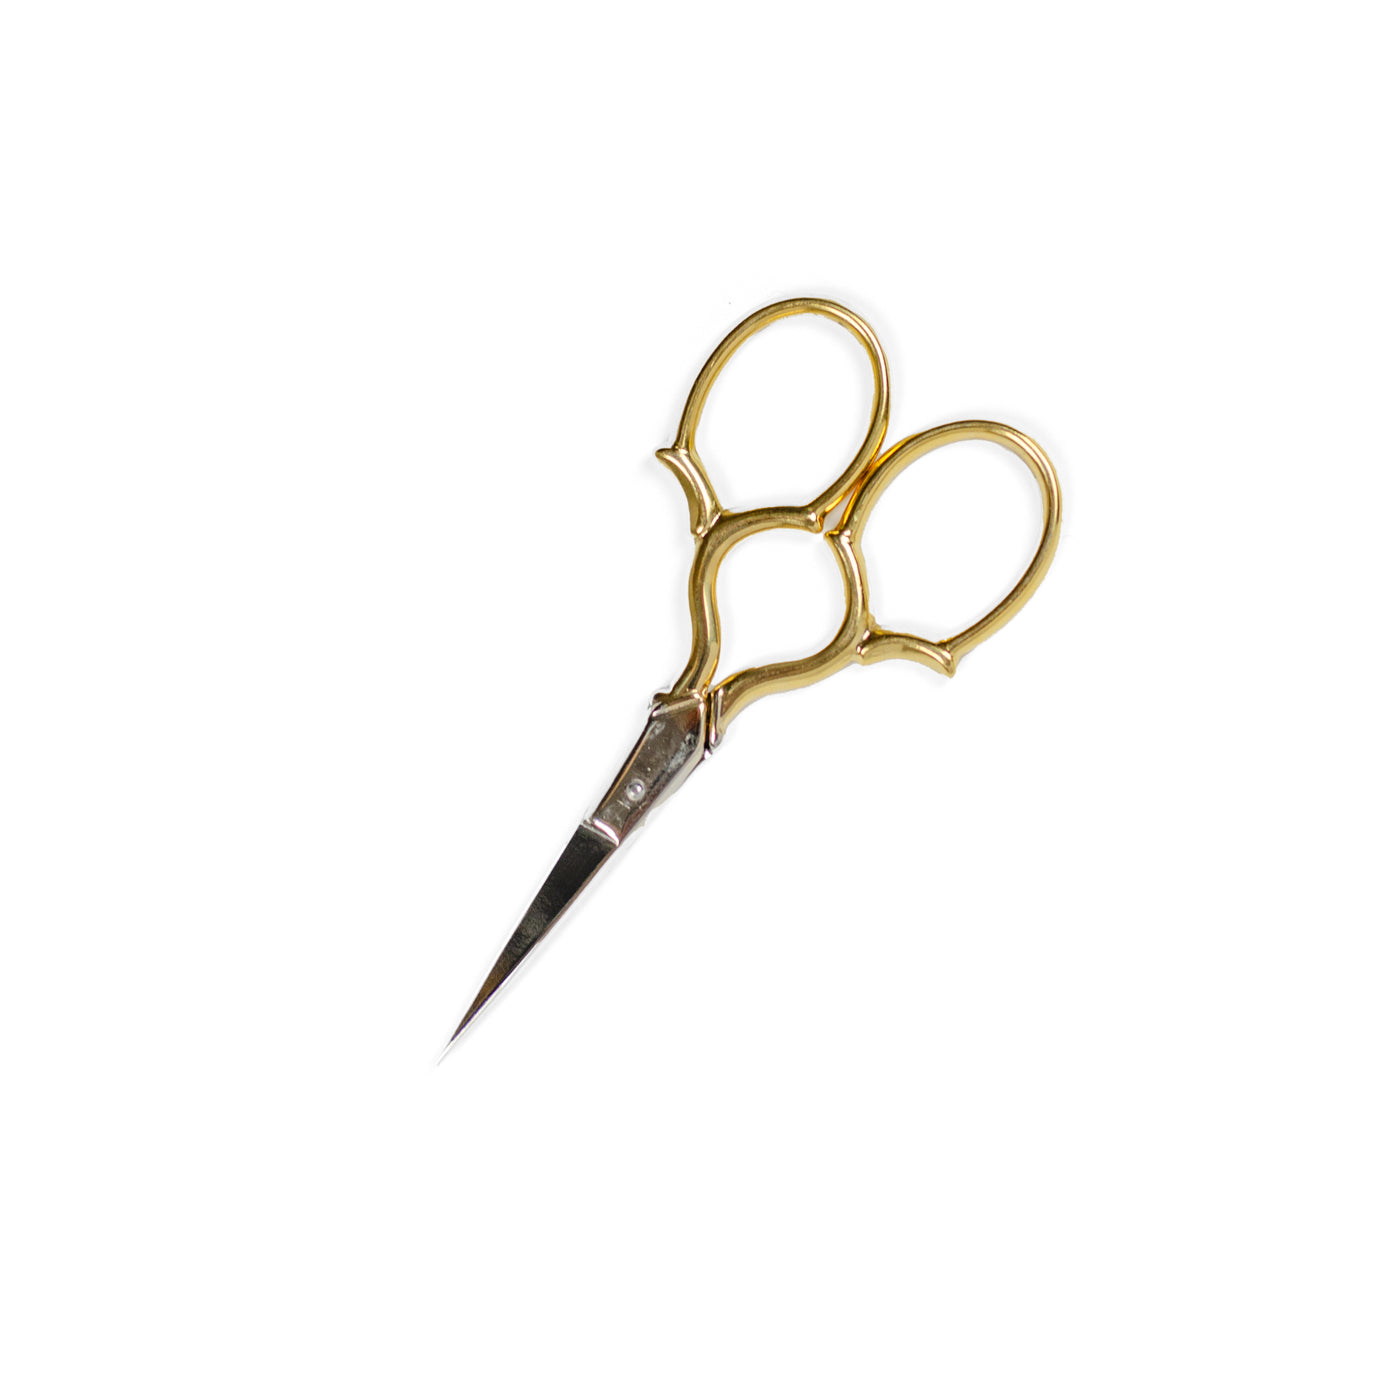 Gold handled embroidery scissors on a white background.